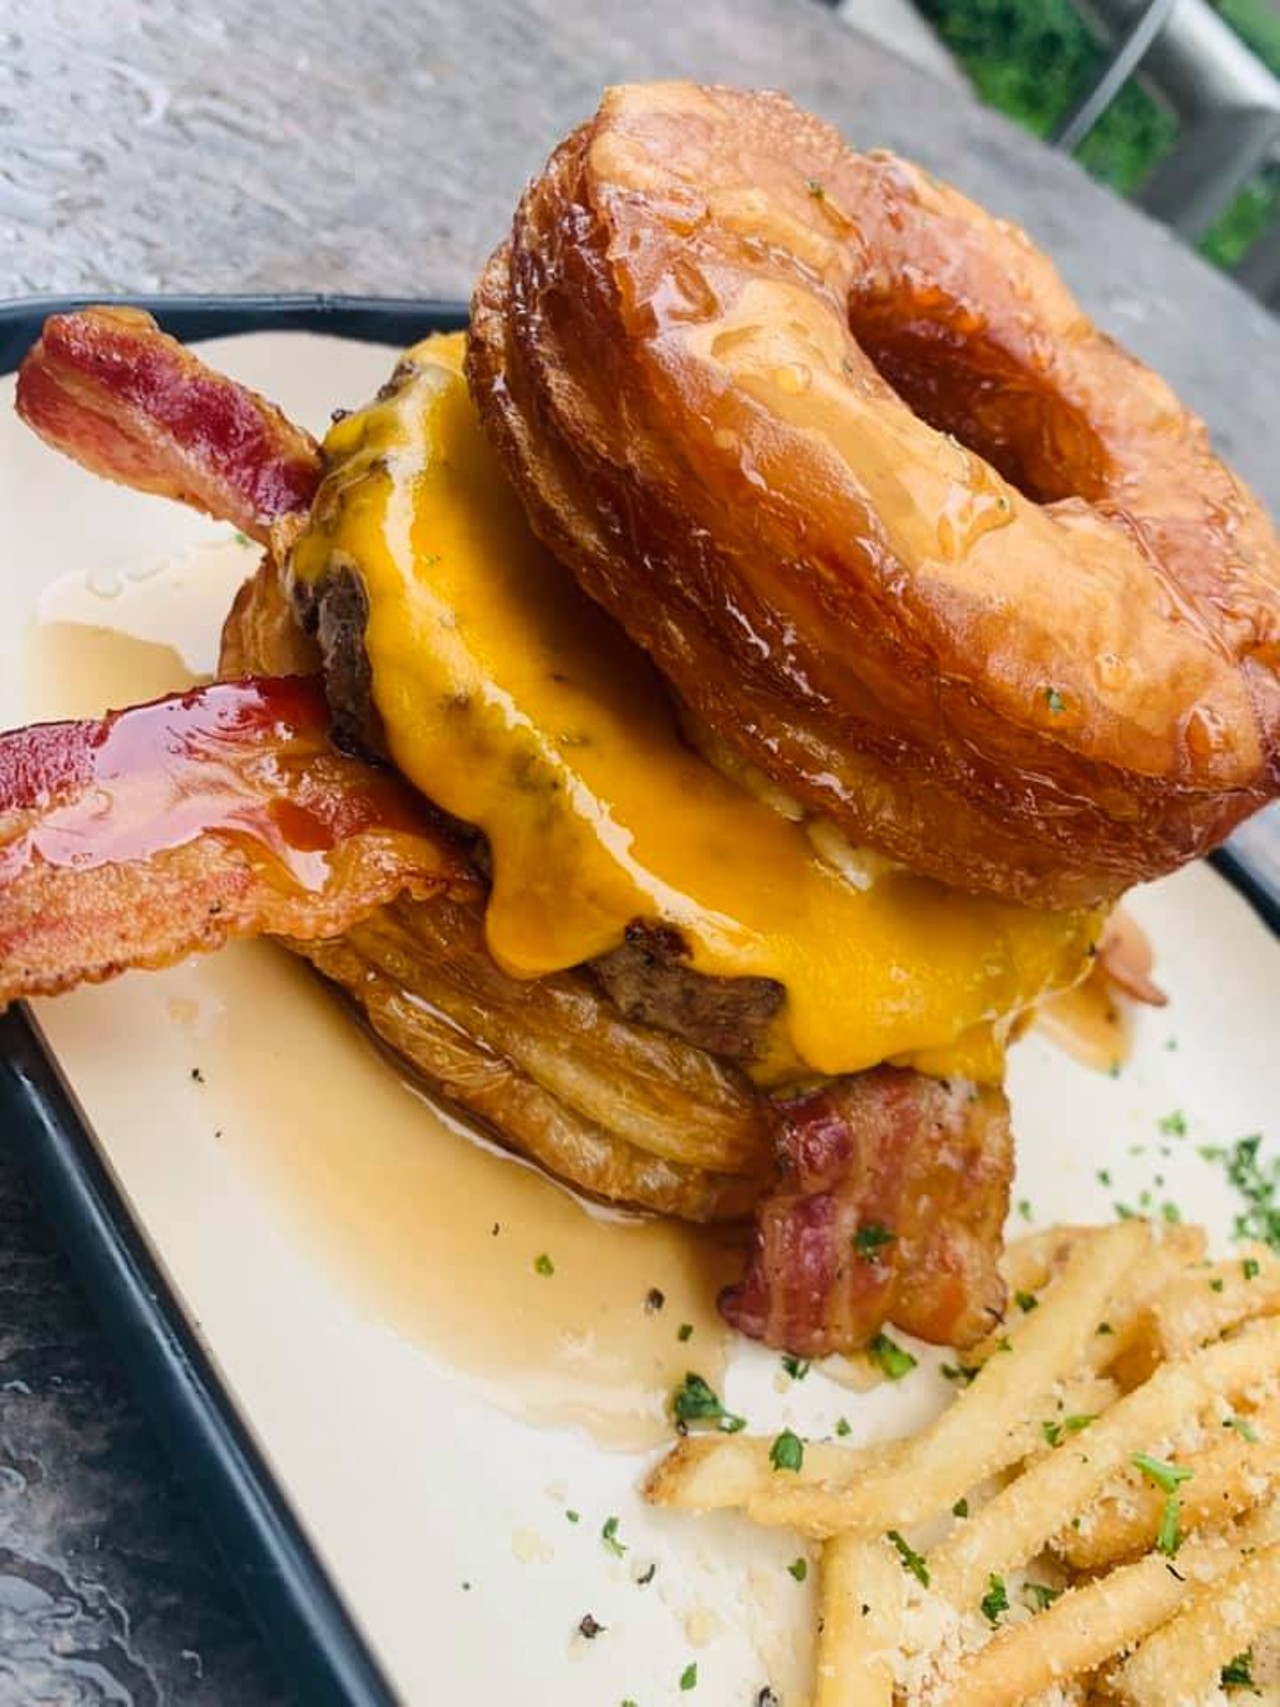 The Stubborn Mule 
407-730-3400, 100 S. Eola Drive Suite 103
The Stubborn Mule offers a playful menu filled with new American dishes and cocktails. Stop by for brunch to try one of their breakfast handheld creations. 
Photo via The Stubborn Mule/Facebook